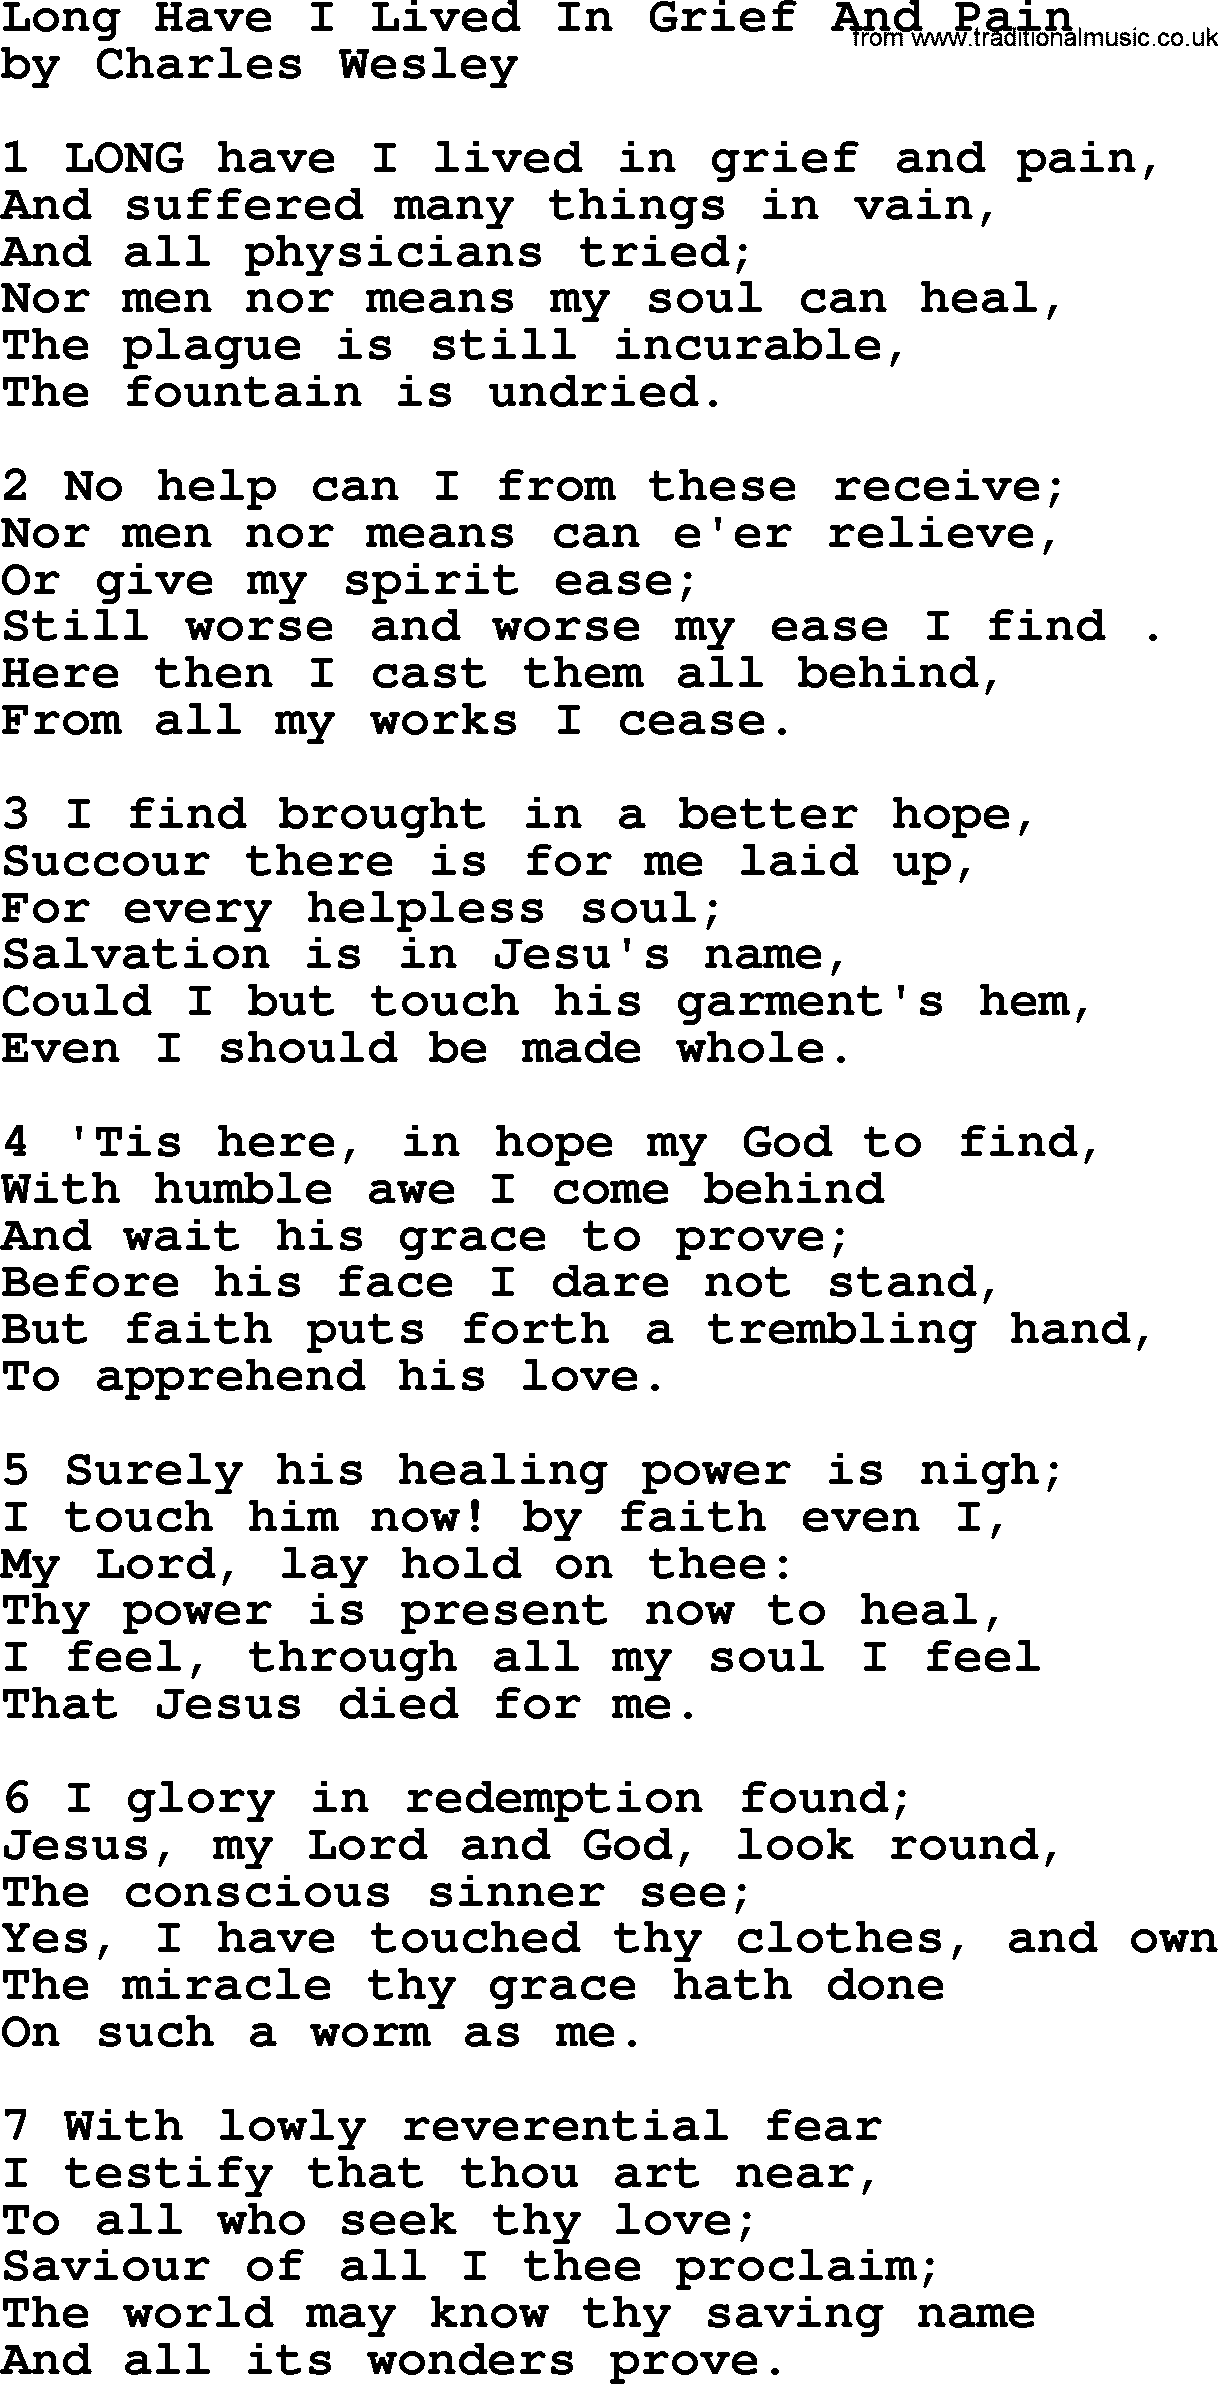 Charles Wesley hymn: Long Have I Lived In Grief And Pain, lyrics